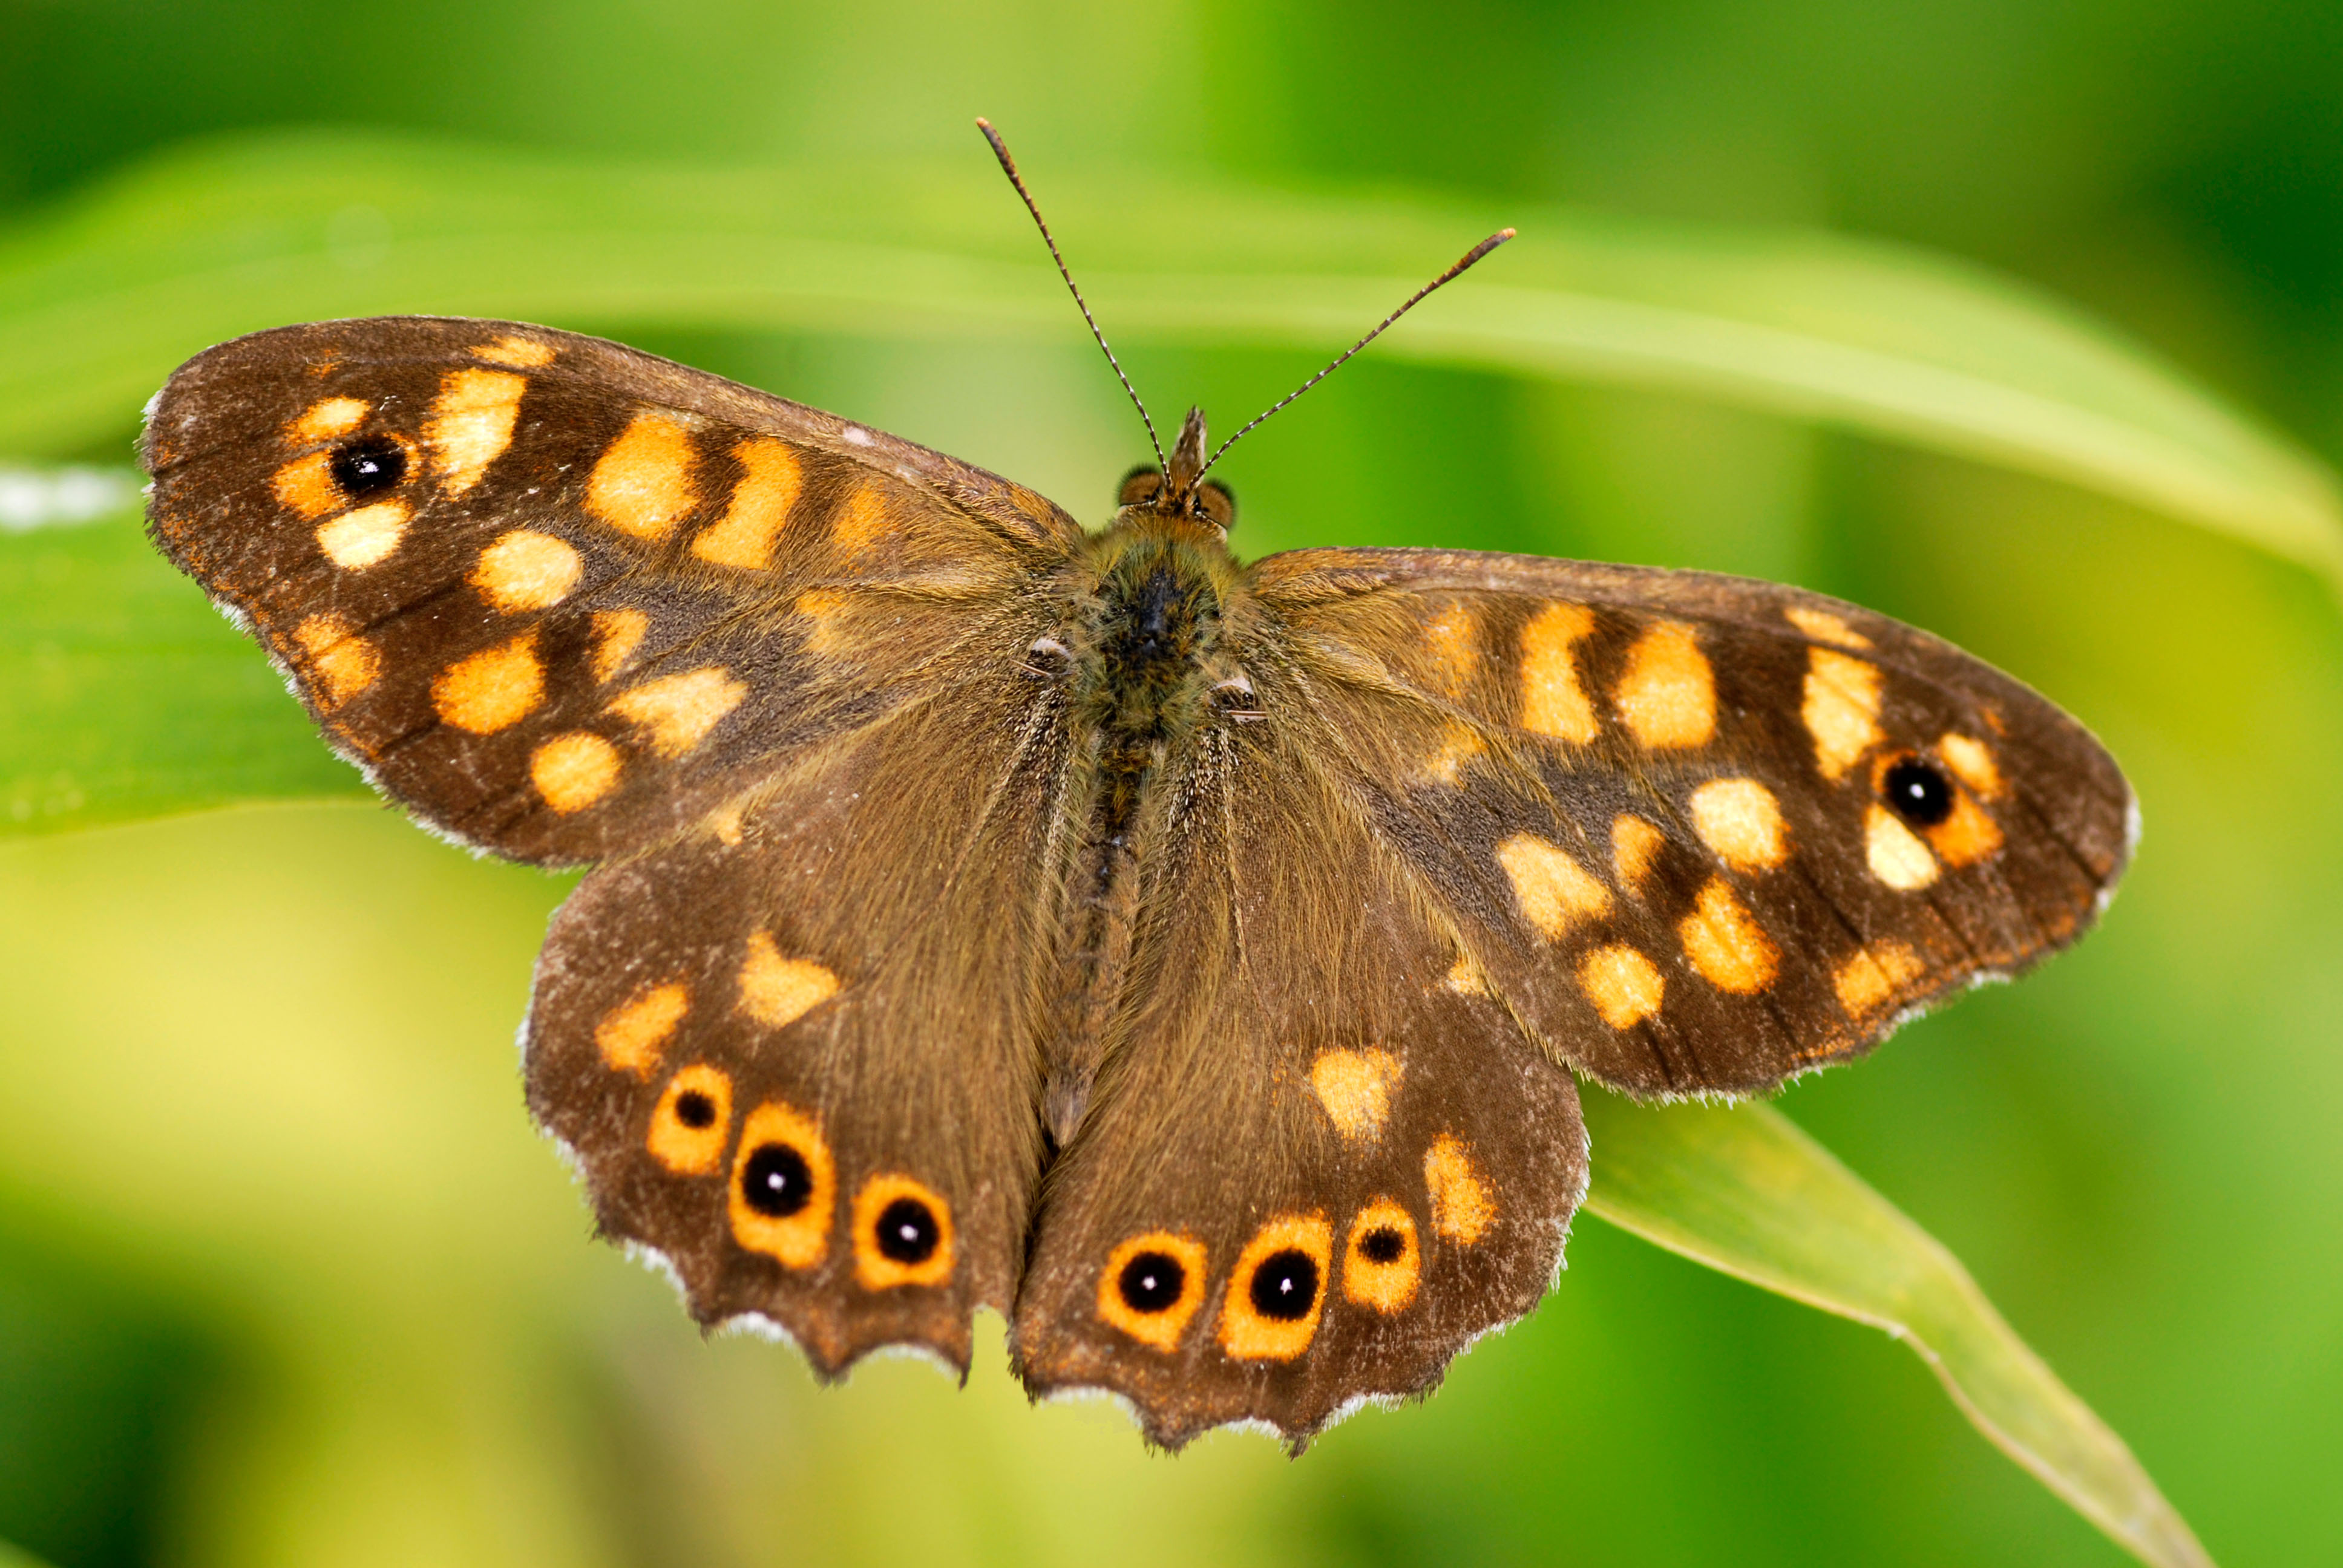 Speckled wood butterfly (Alamy/PA)